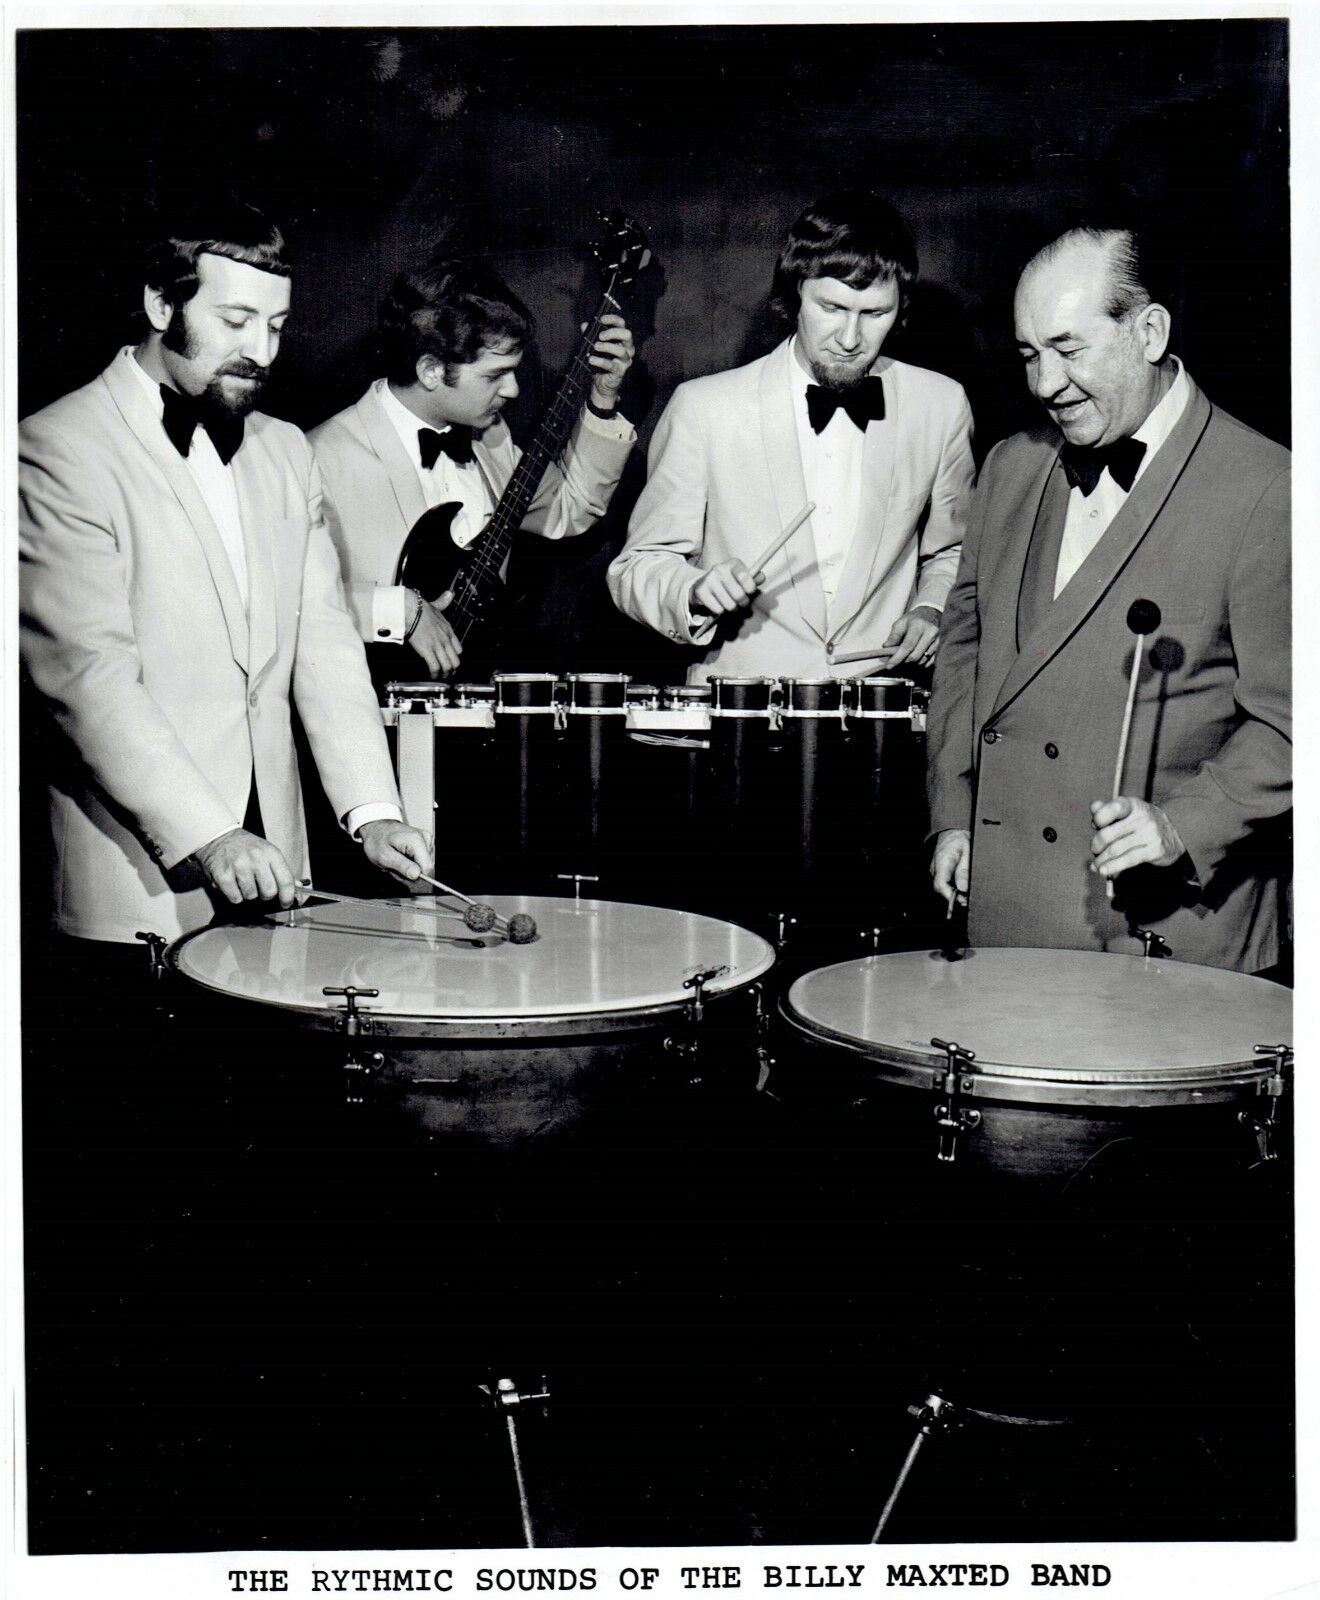 1970 Vintage Photo The Rhythmic Sounds of the Billy Maxted Jazz Band performing